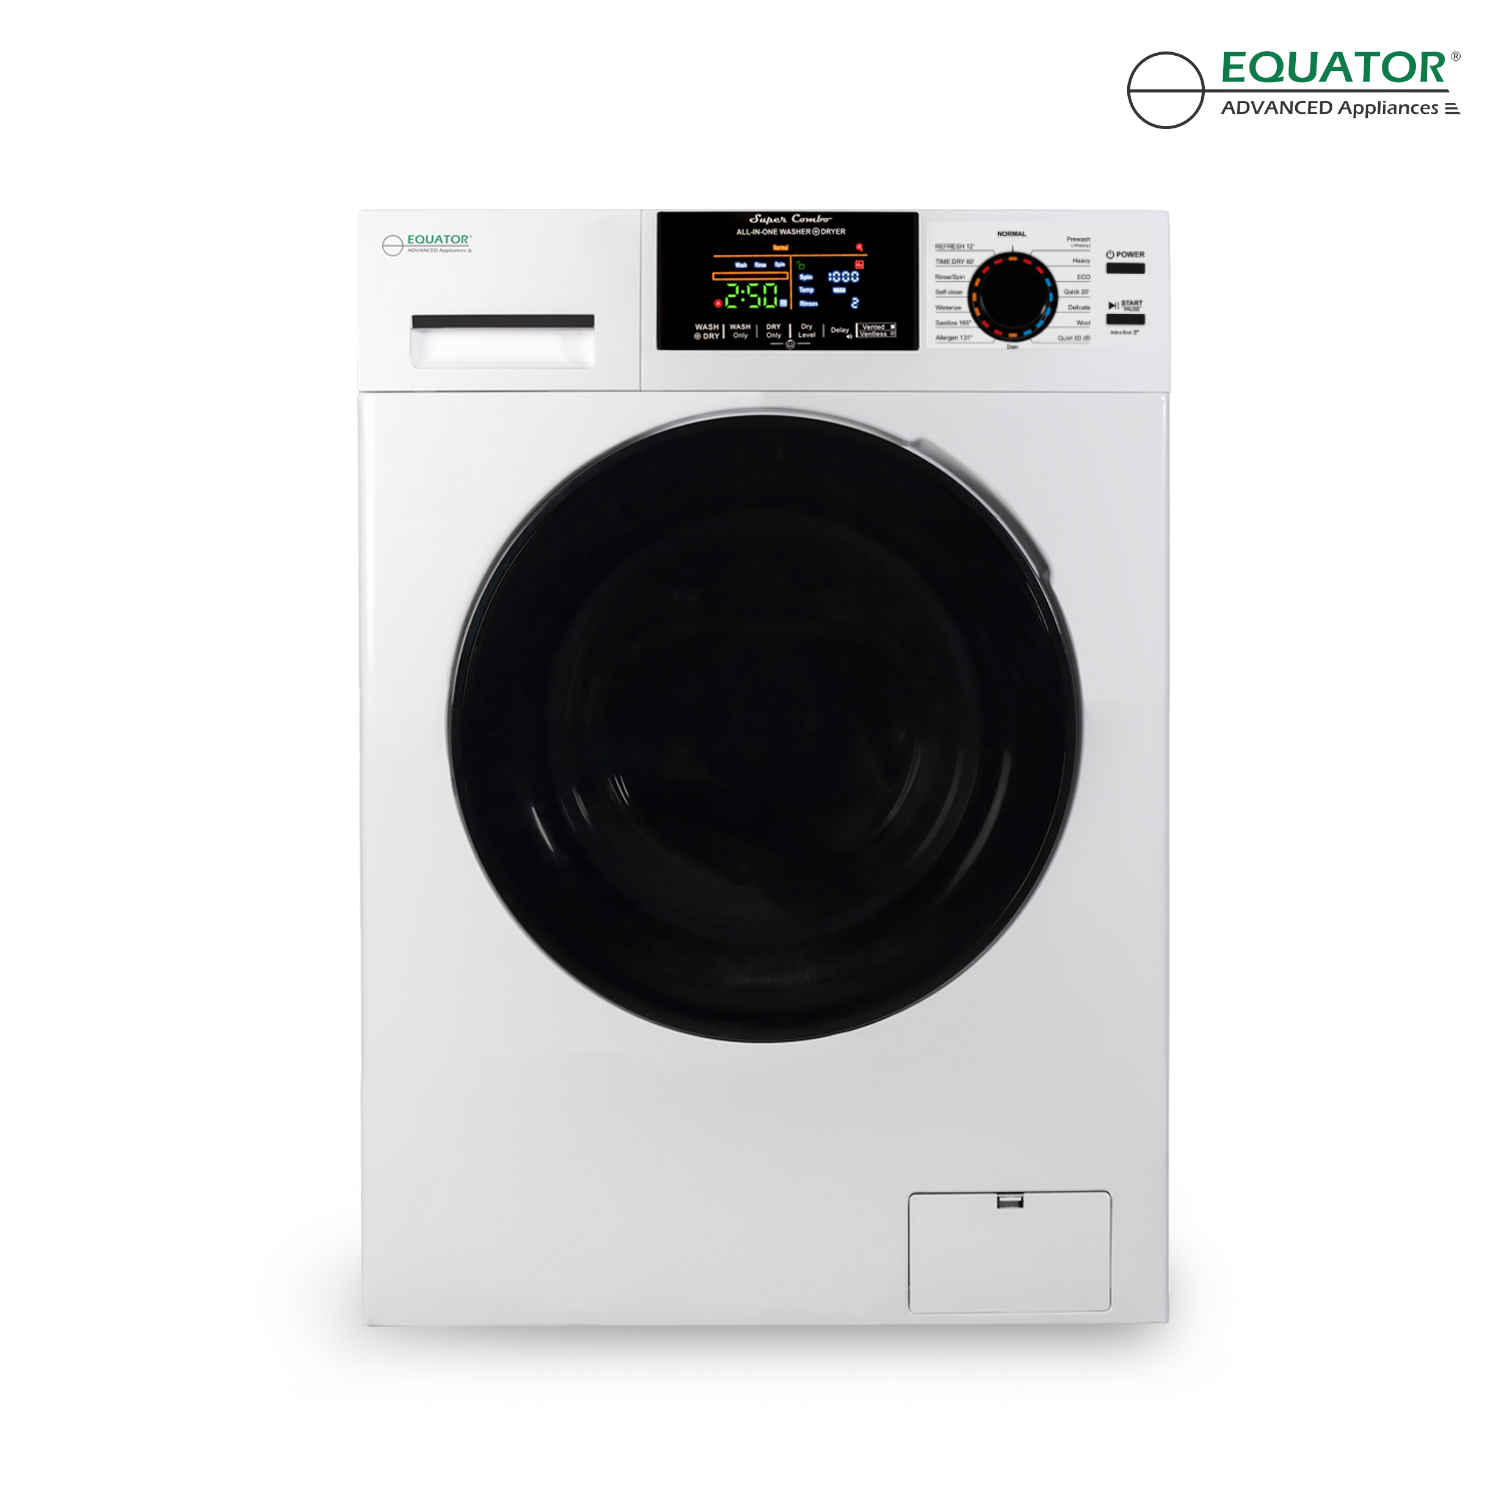 Equator Digital Compact 110V Vented/Ventless 18 lbs Combo Washer Dryer 1400 RPM (White)